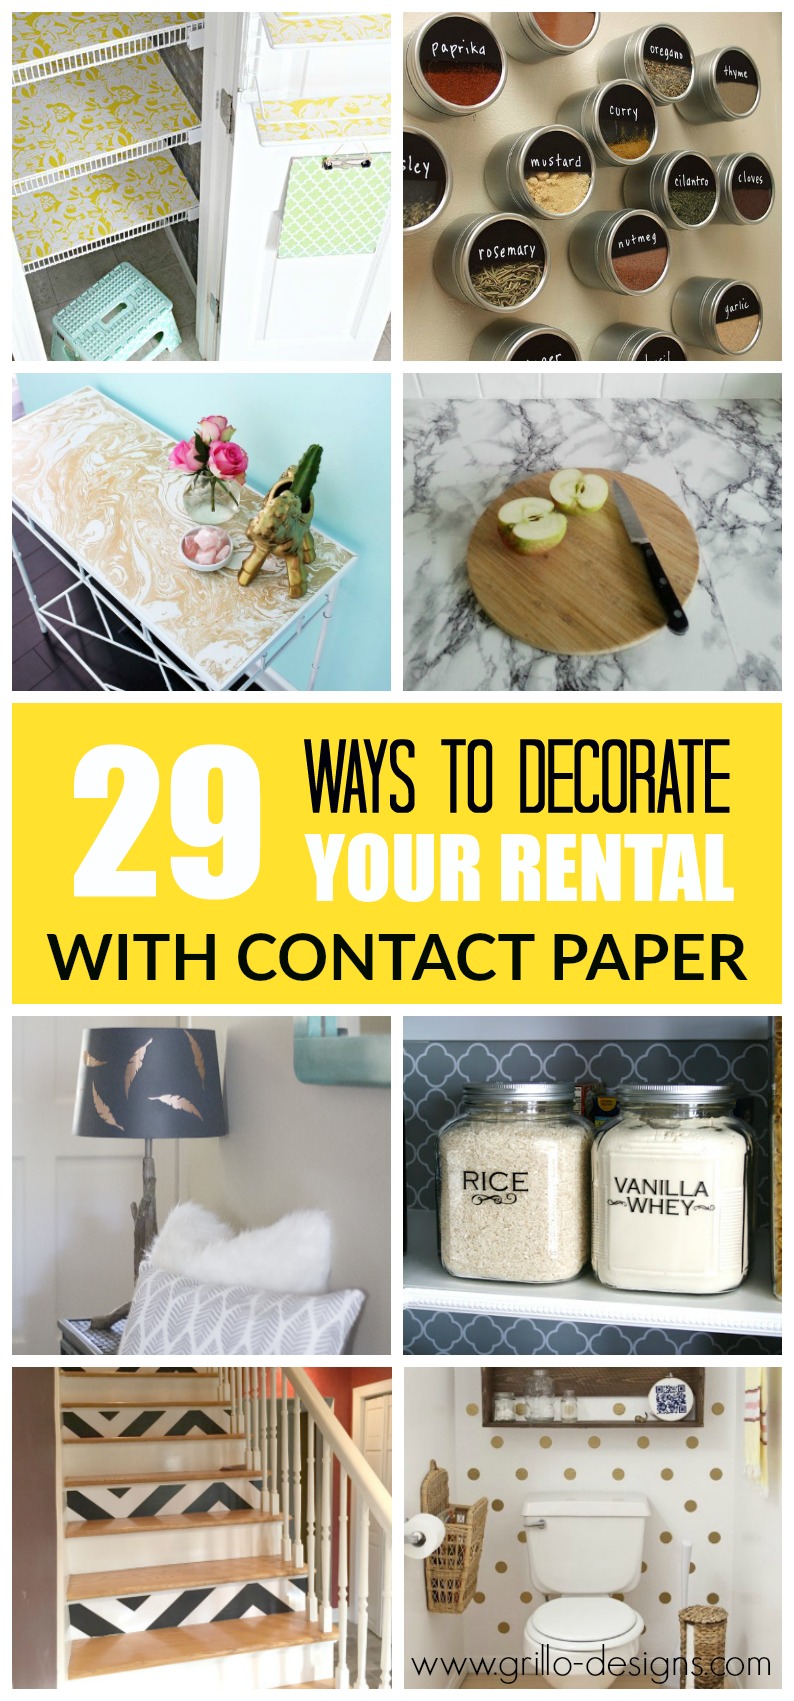 Click here to see contact paper ideas 